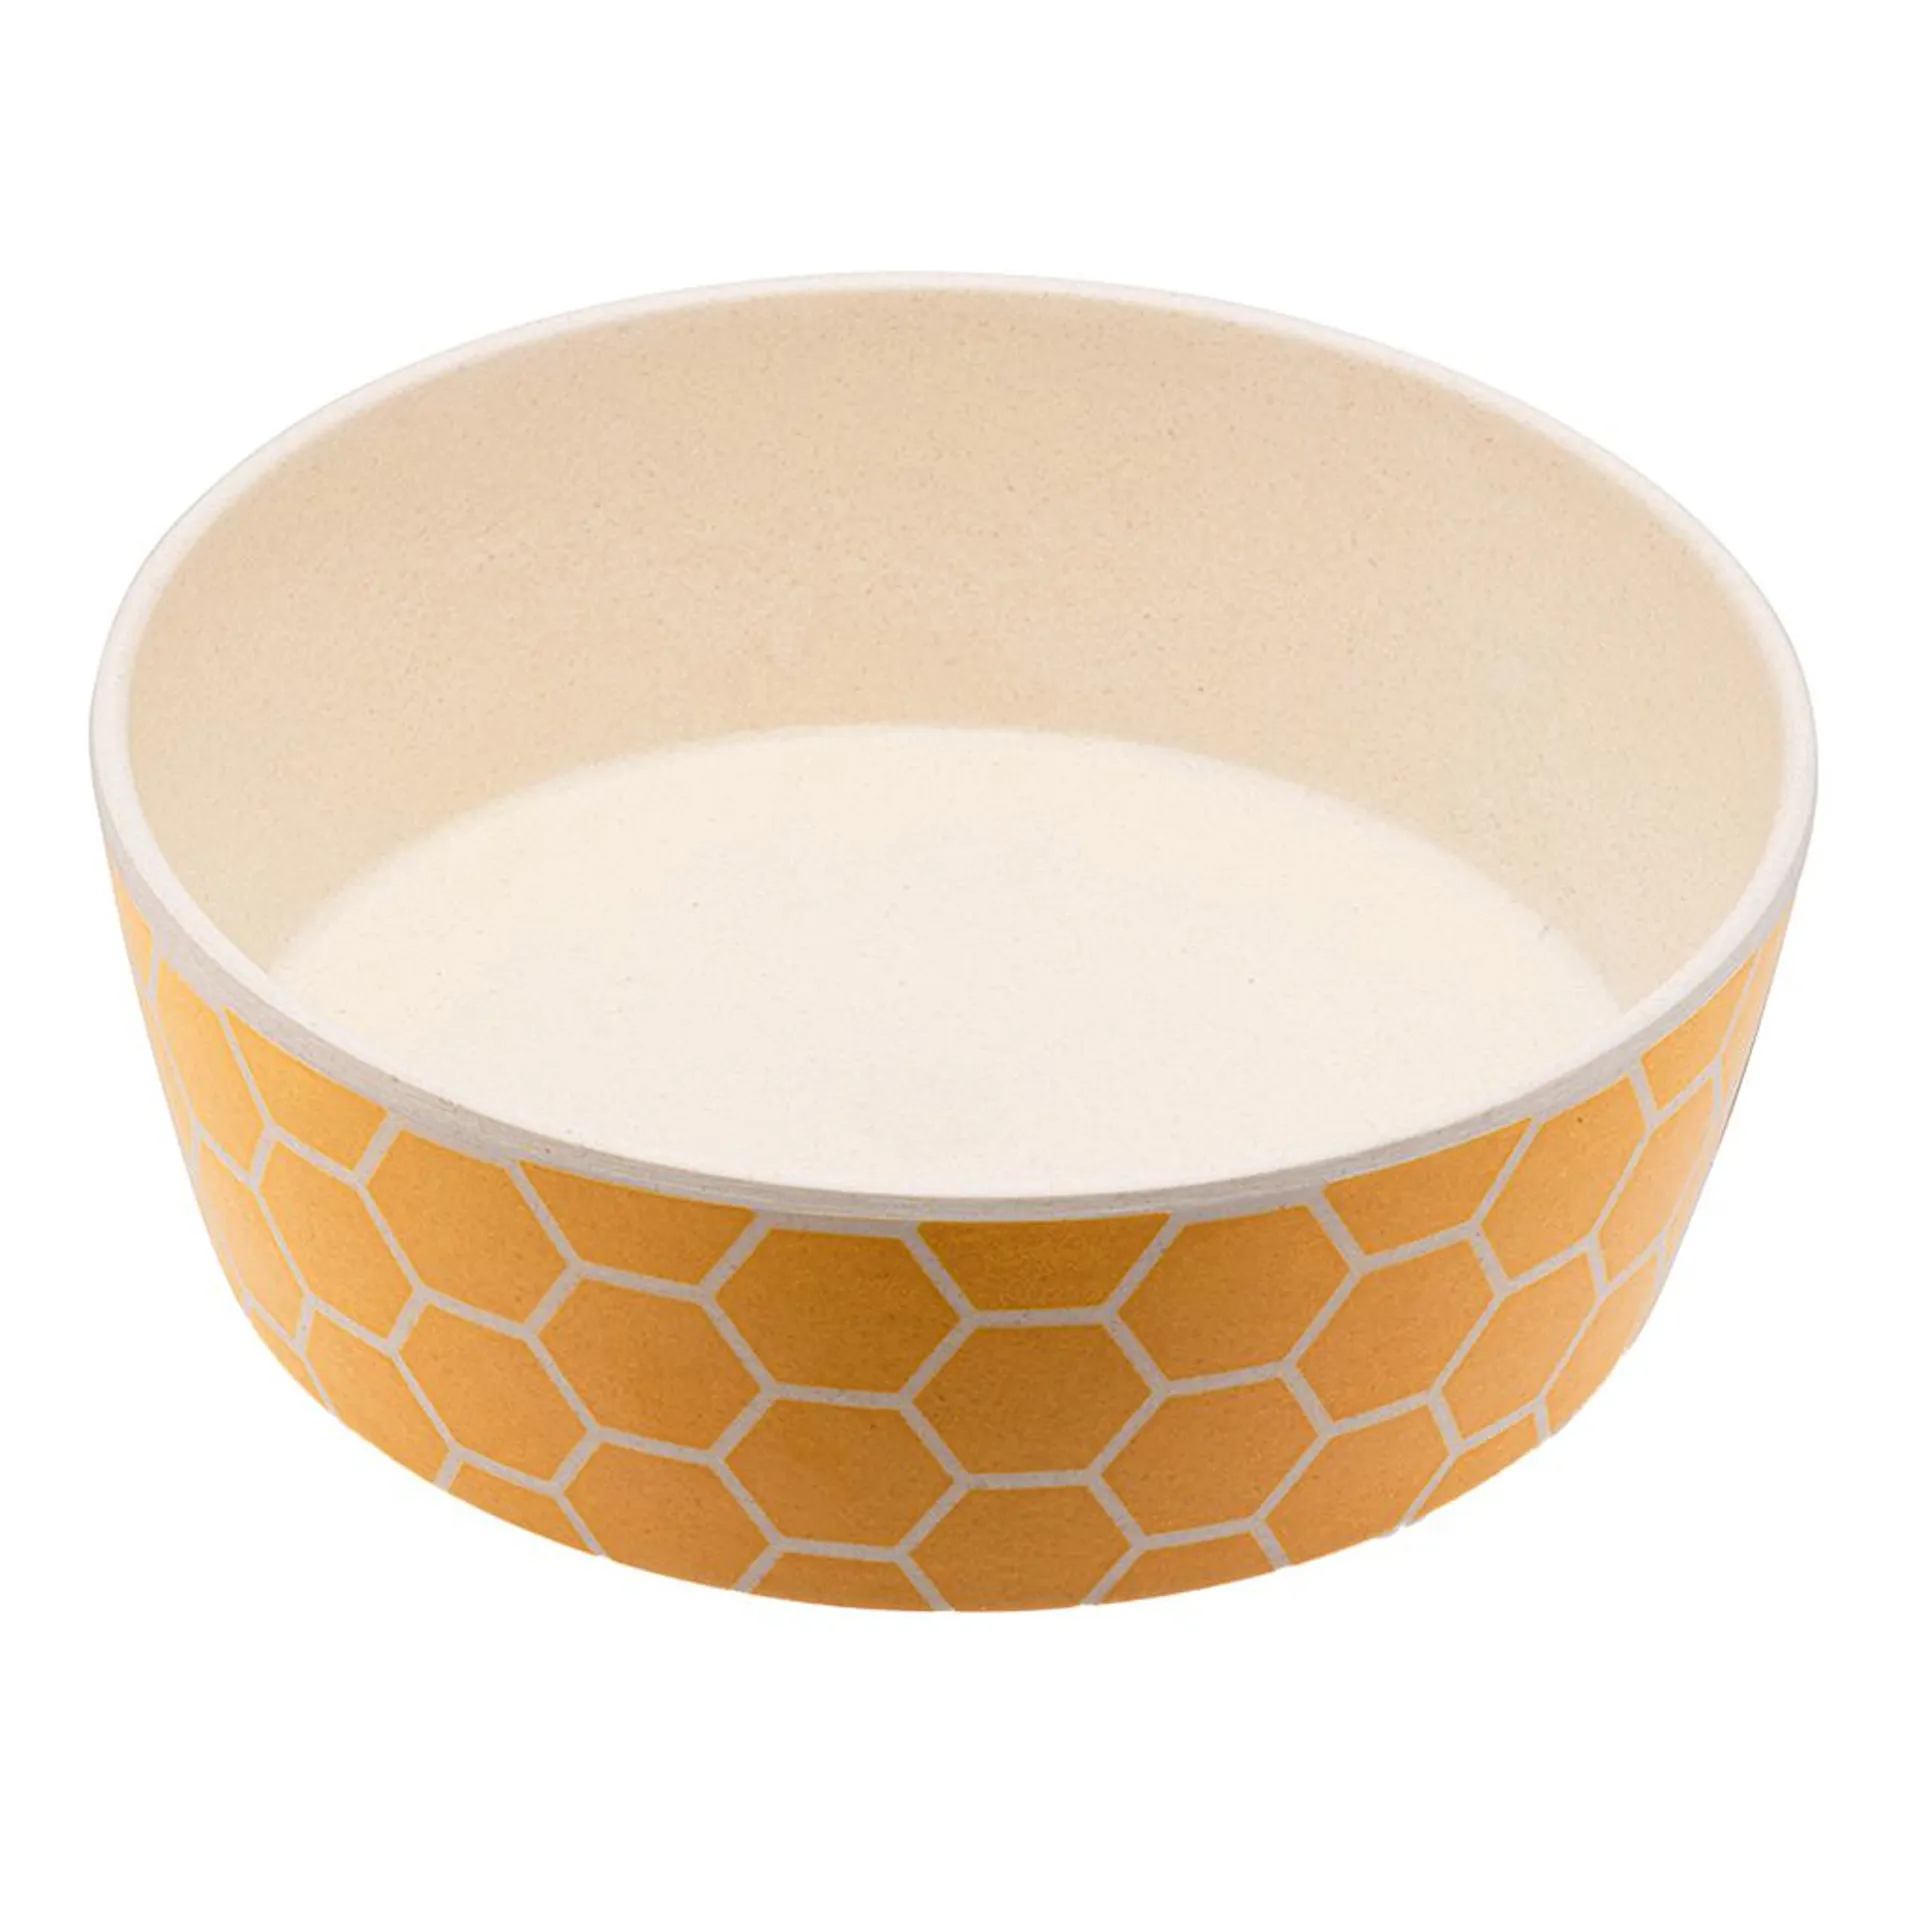 Save the Bees - Pet Bowl from Beco Pets